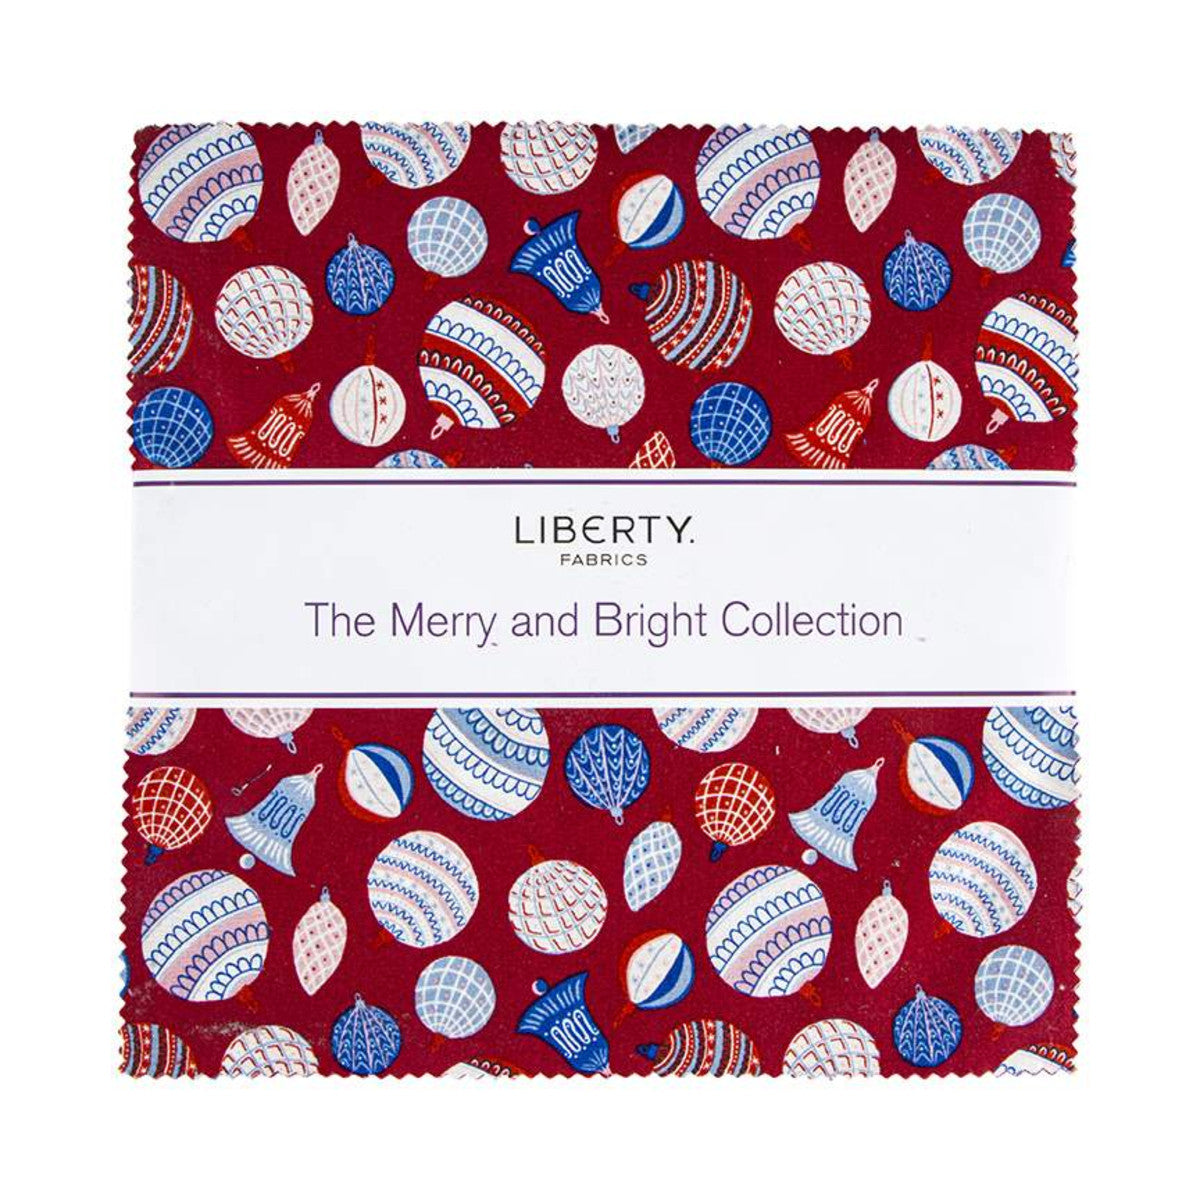 Bon Voyage Wrapping Paper Sheets - THE BEACH PLUM COMPANY